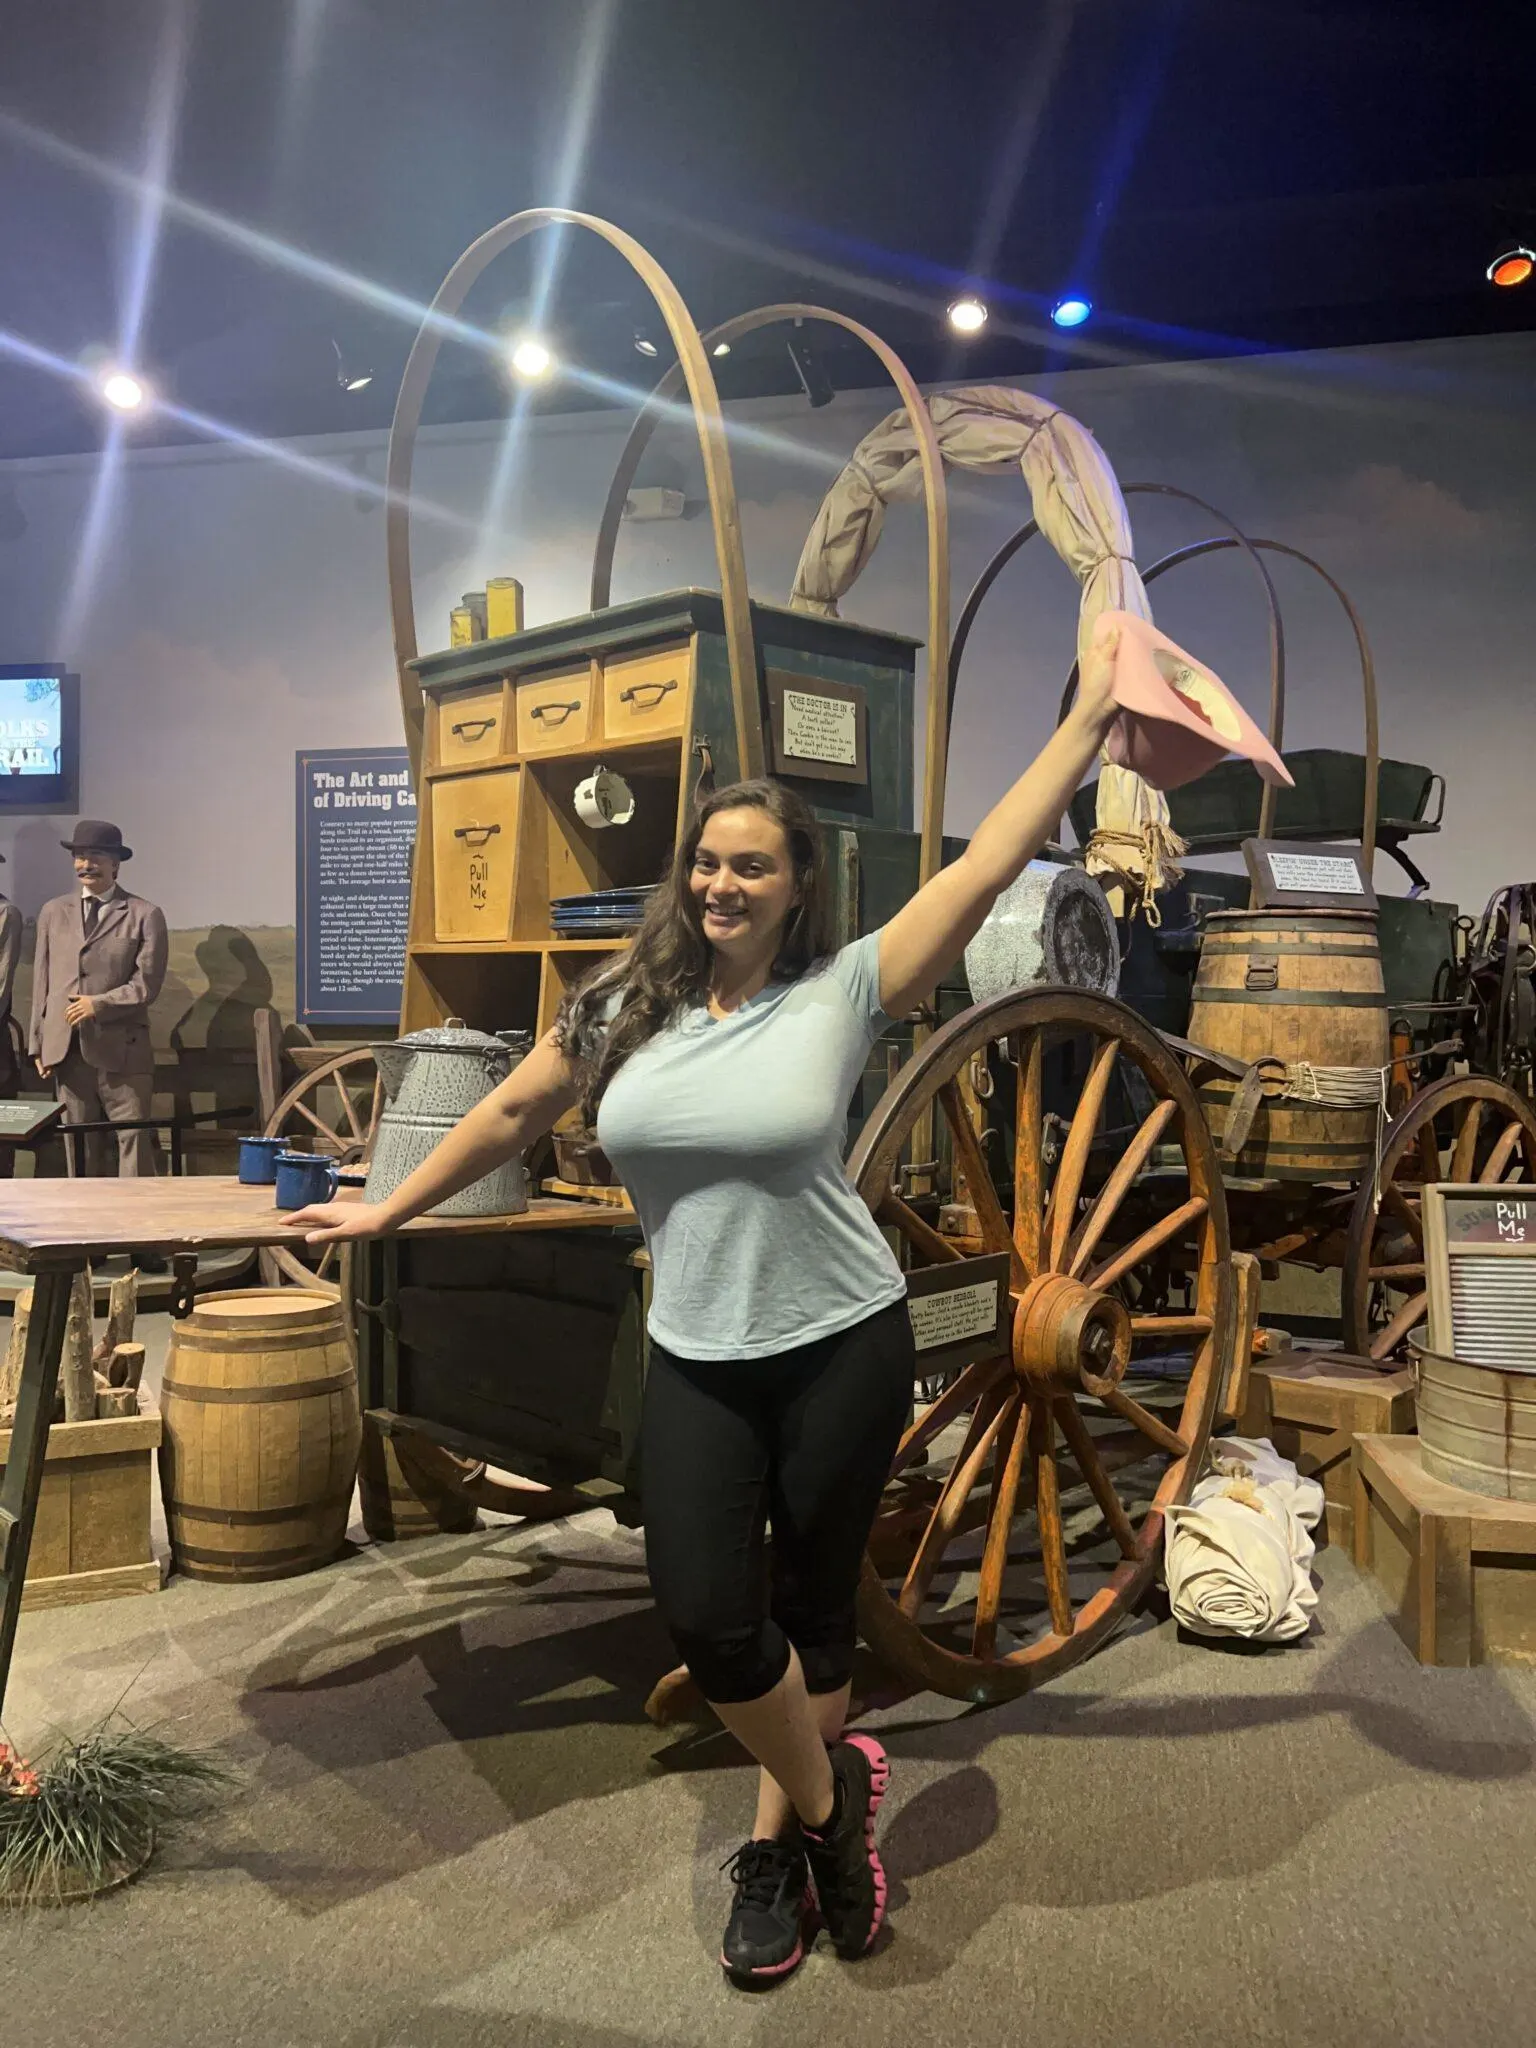 Woman holding cowgirl hat and standing in front of wagon in museum